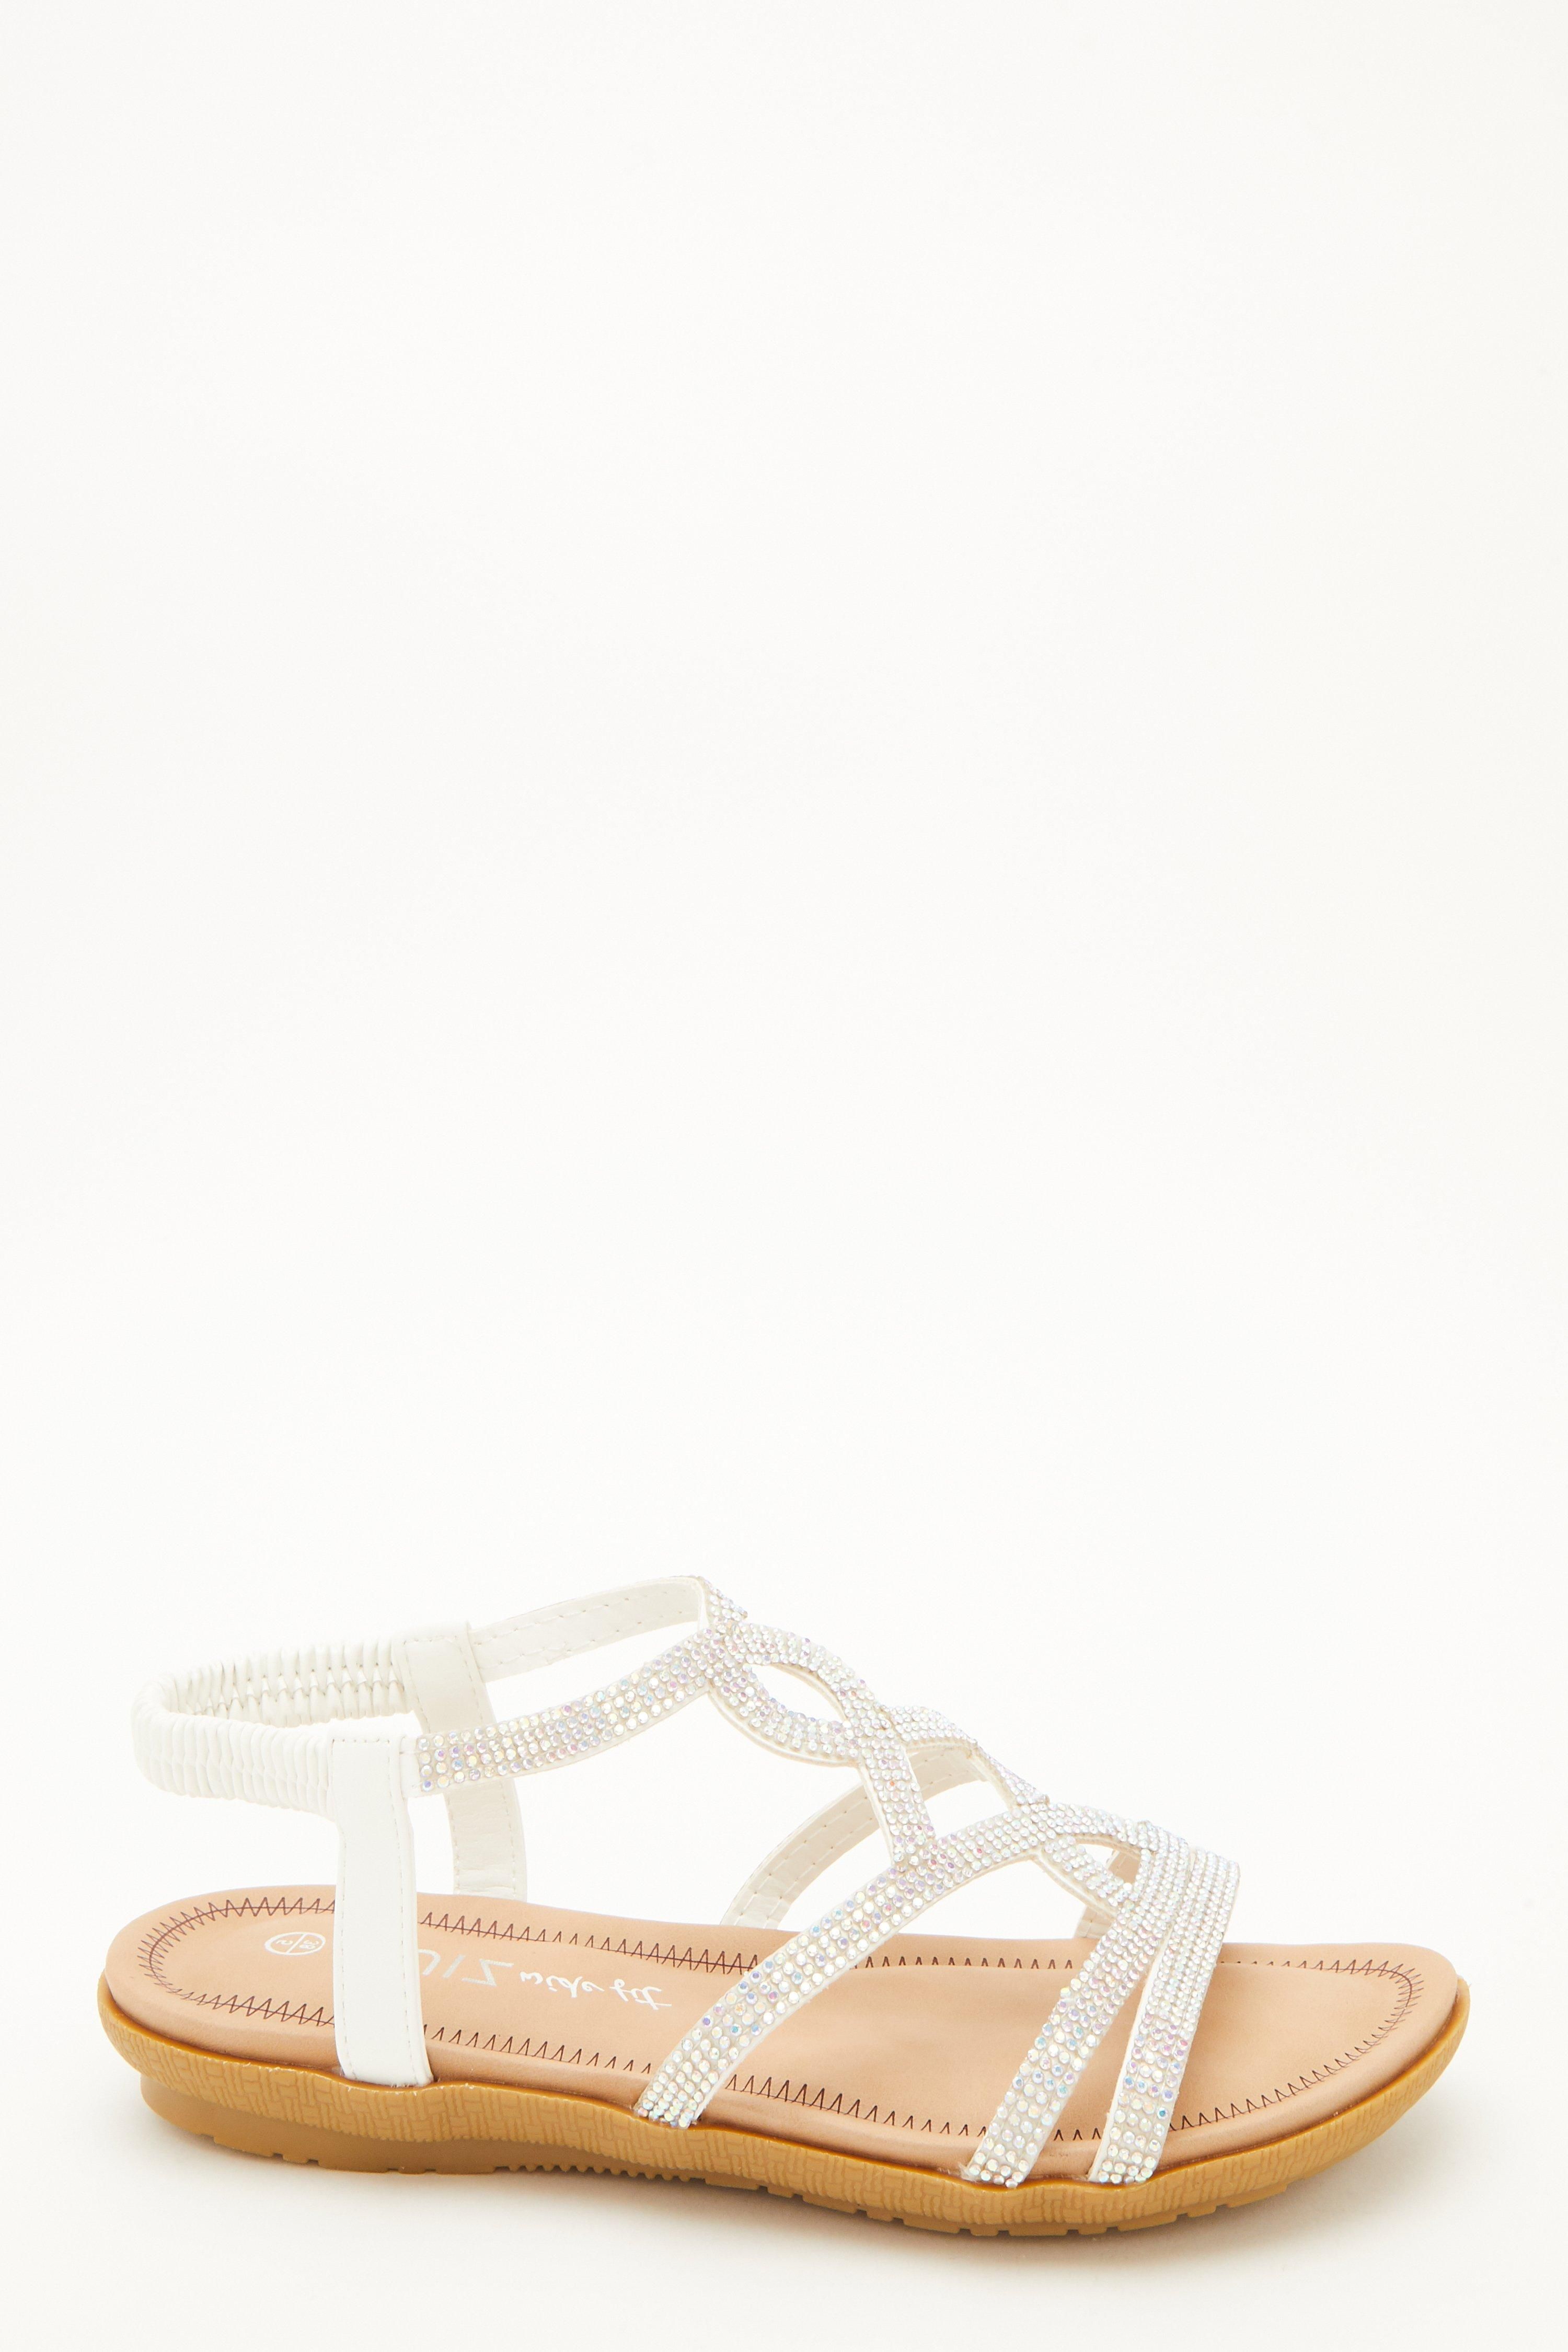 - Wide fit   - Flat sandals  - Diamante detail   - Twist strap desgin   - Elasticated strap  - Padded insole for added comfort